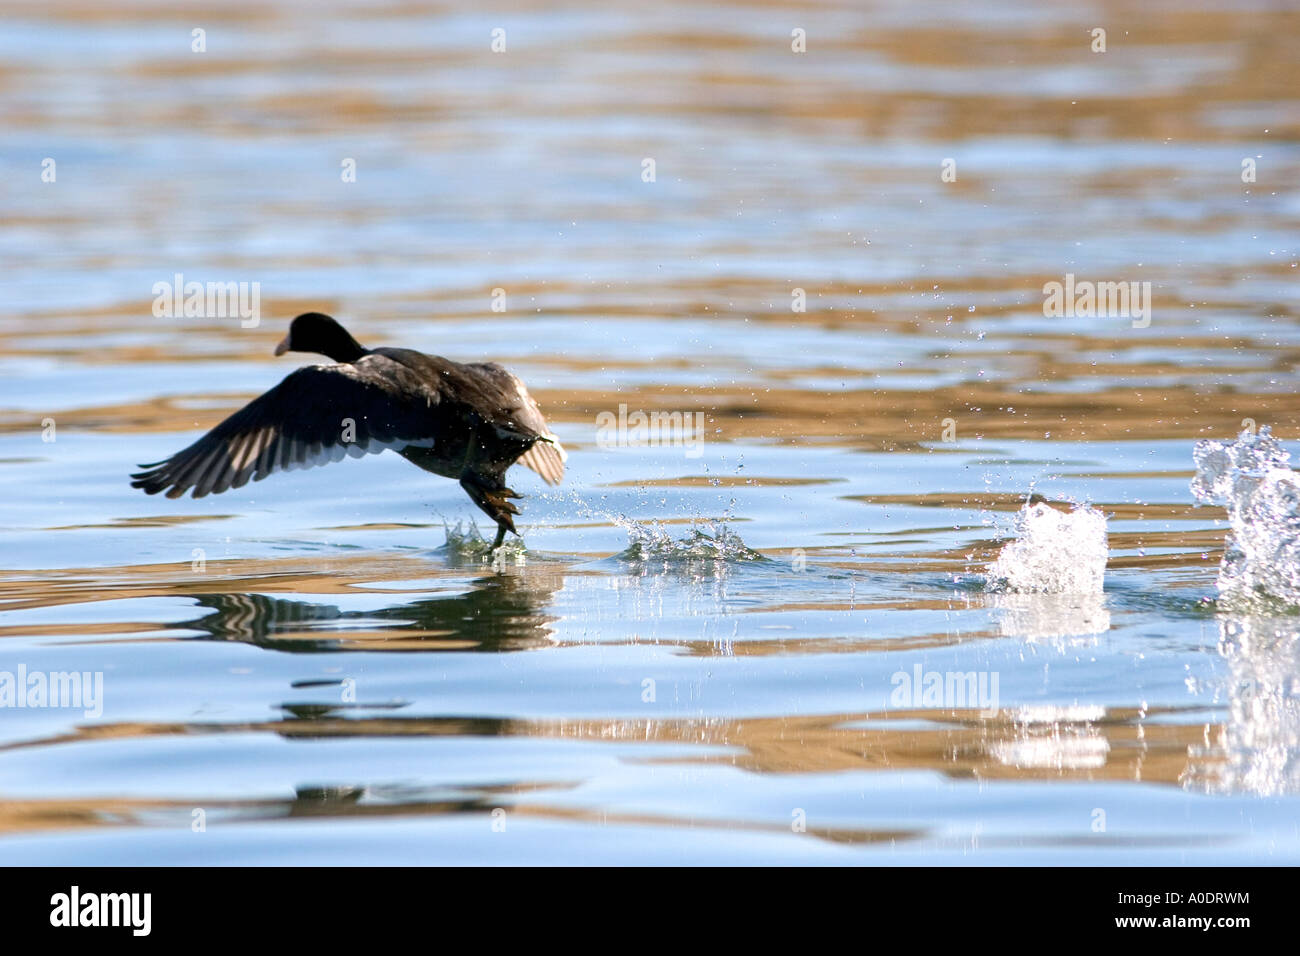 A coot running on the water in Idaho Stock Photo